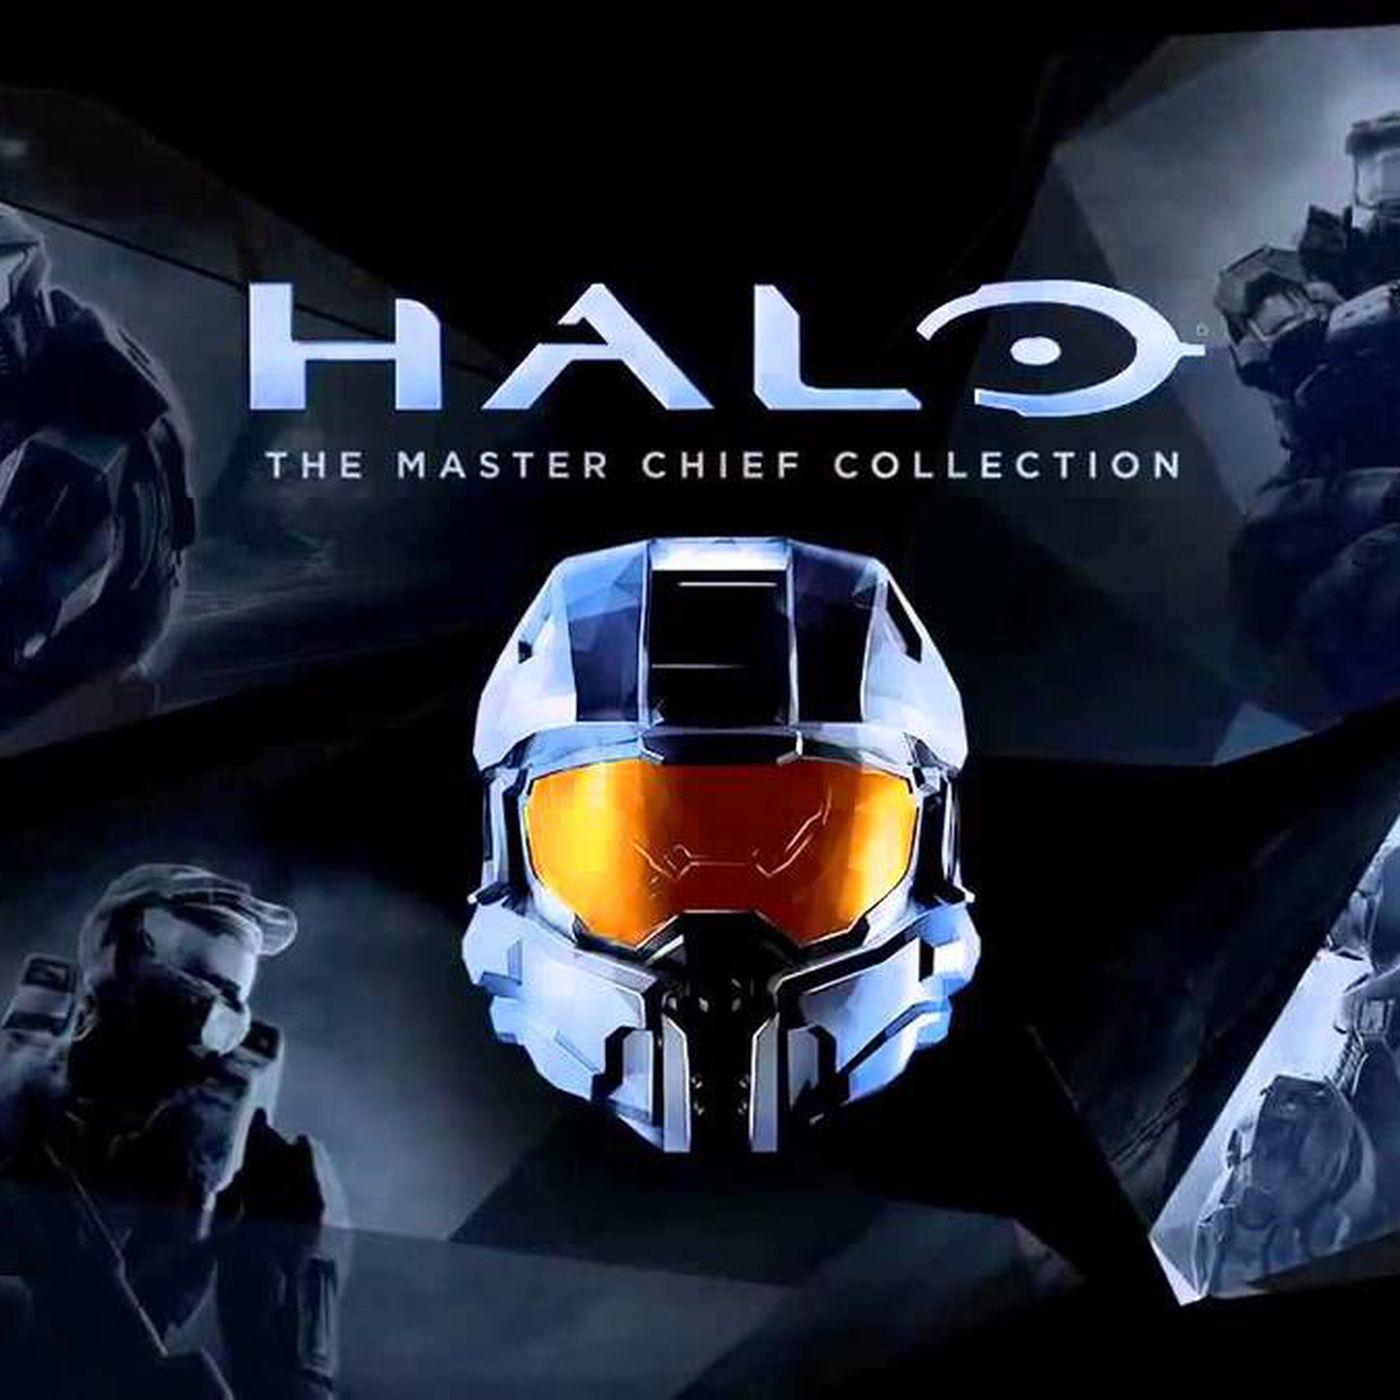 Halo The Master Chief Collection PC Download for $16